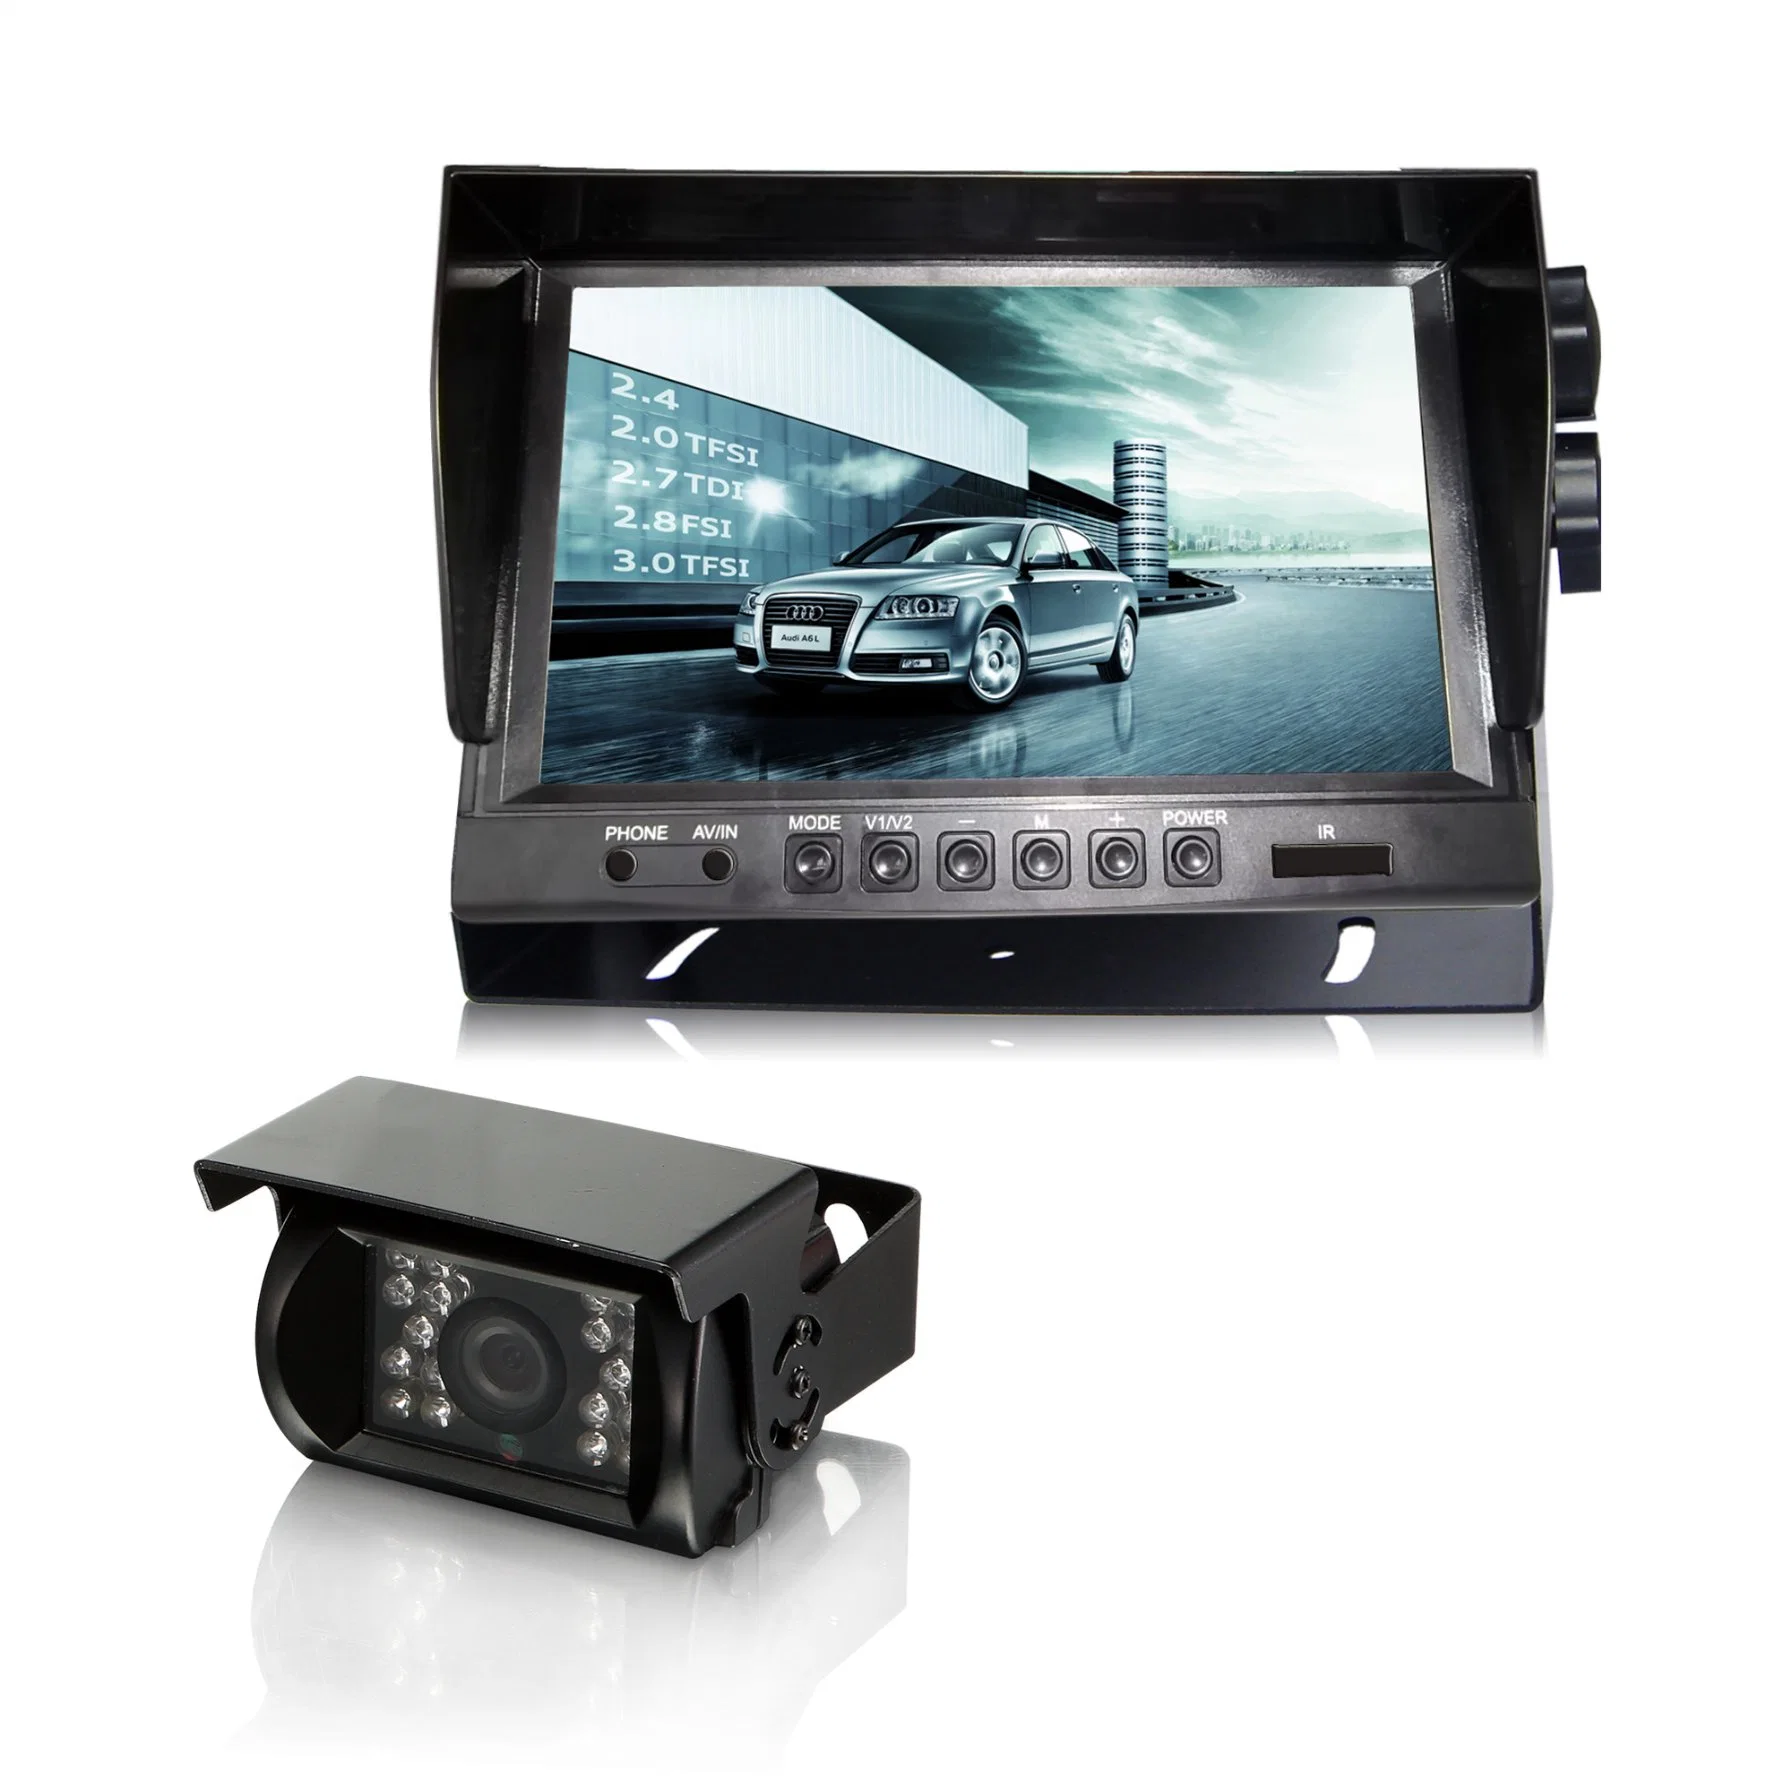 Digital 9 Inches TFT LCD Car Rear View Color Screen Monitor with 4 Reversing Cameras for Bus, Trucks